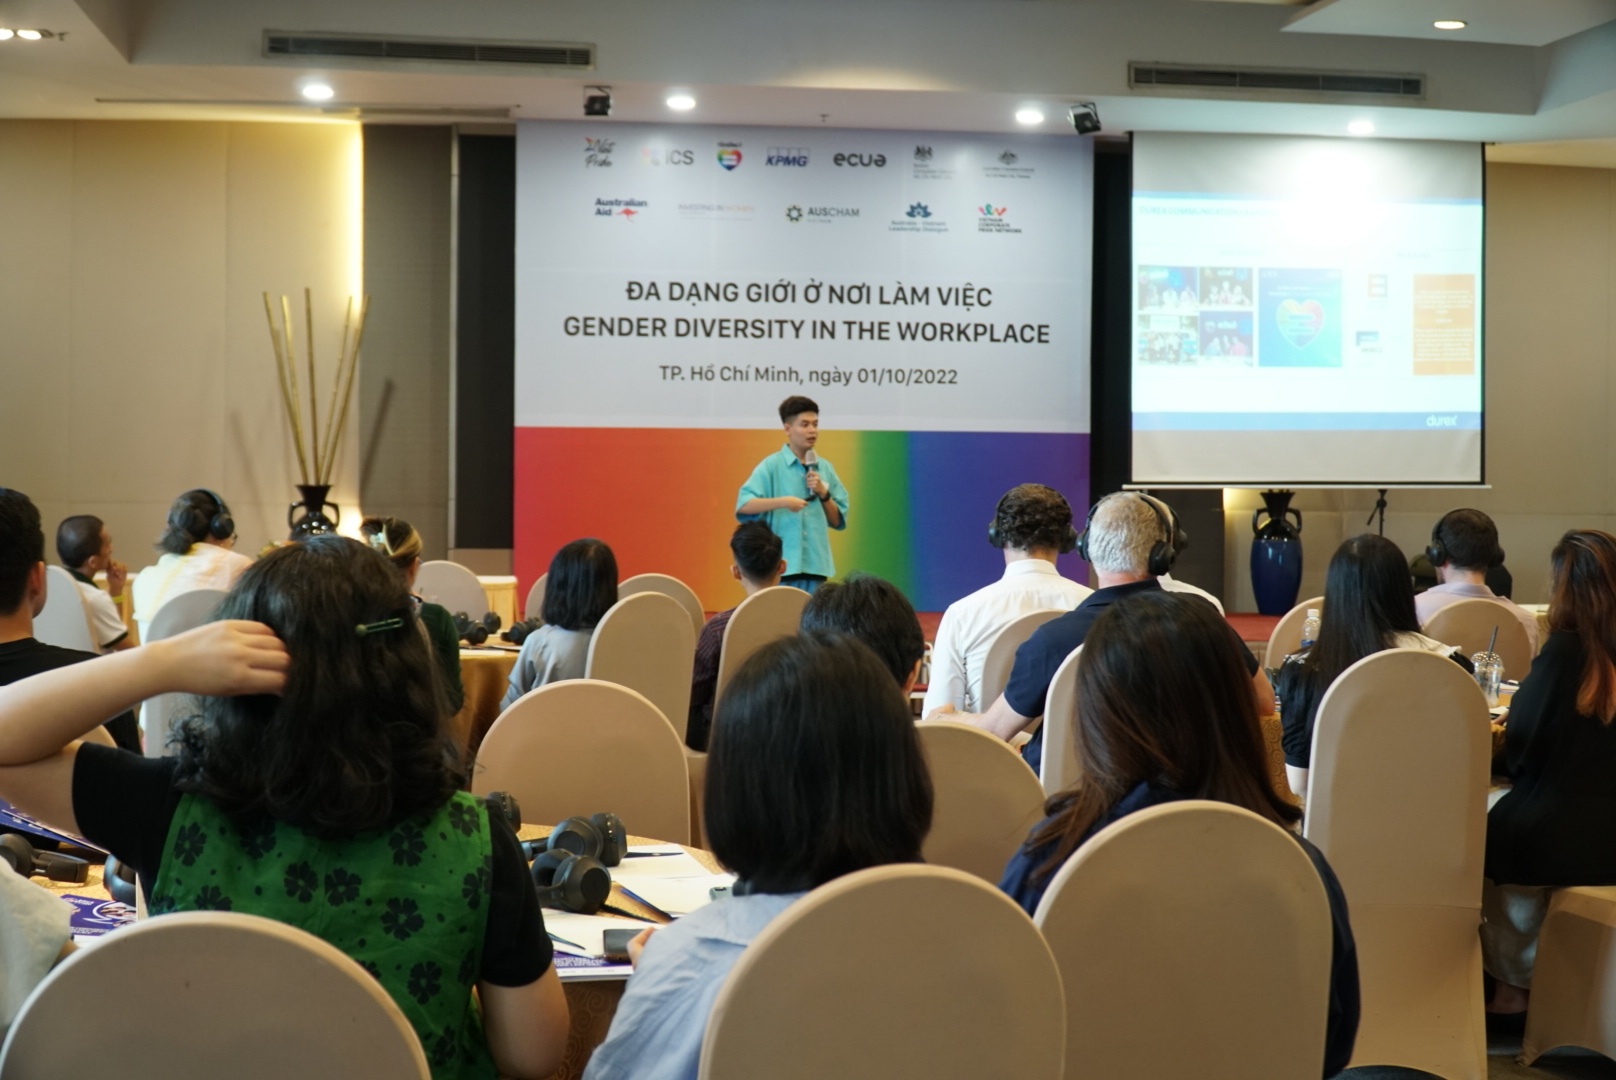 Promoting workplace gender equality and diversity in Vietnam